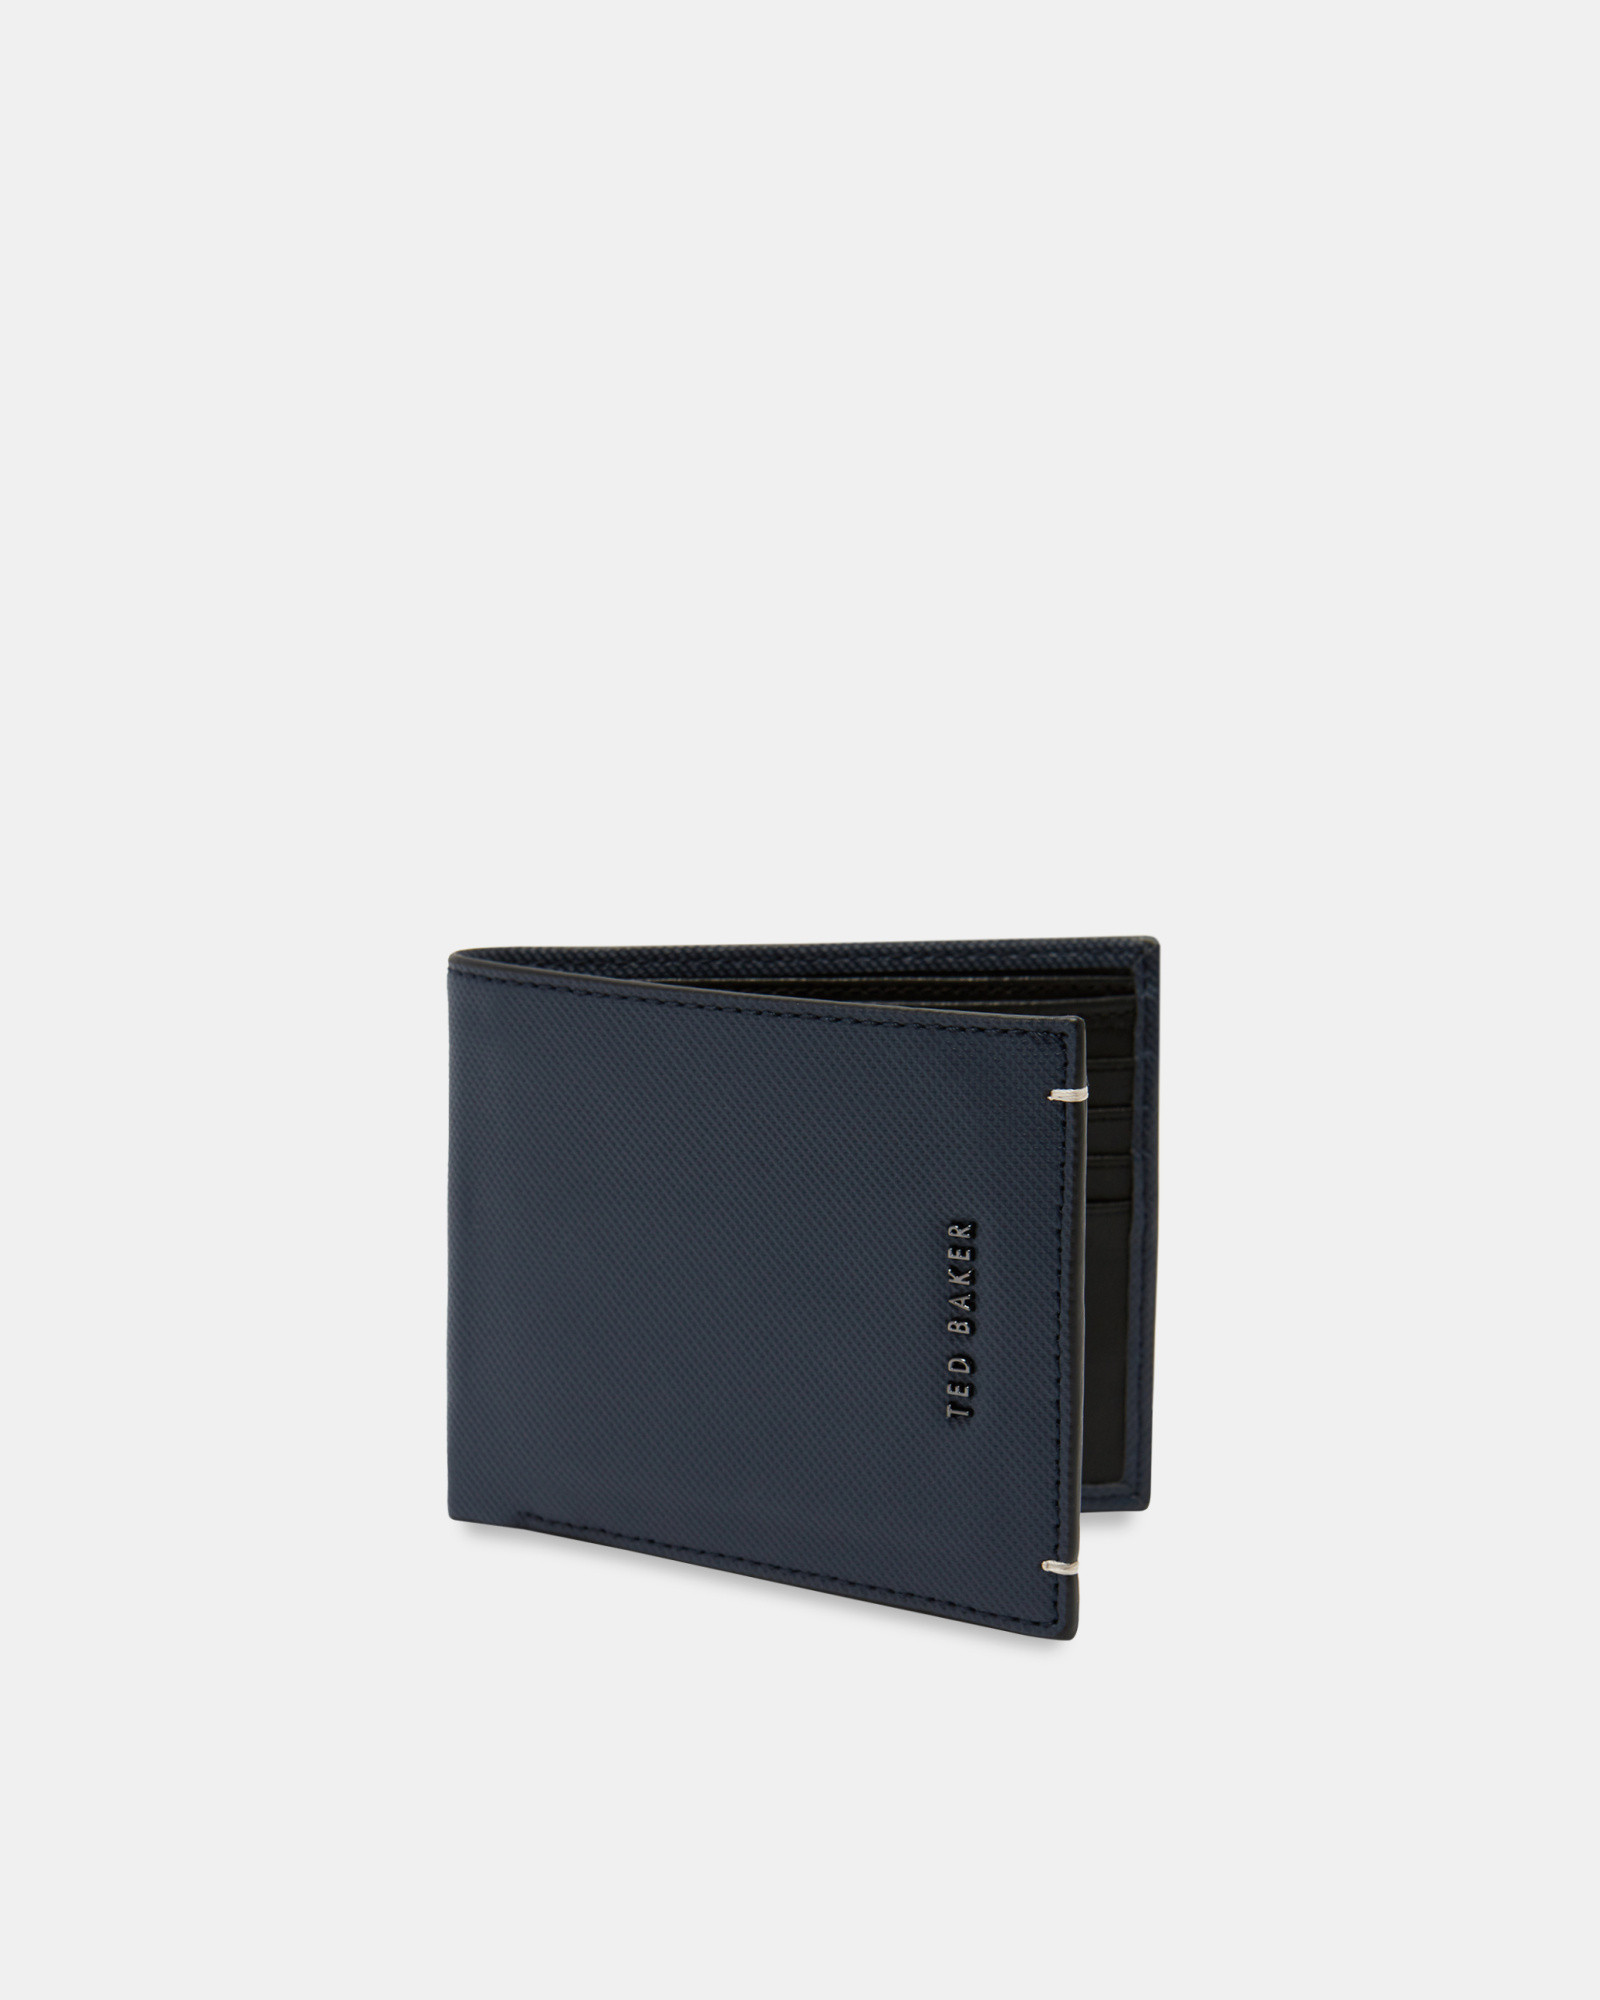 STORMZ Perforated leather bi-fold wallet